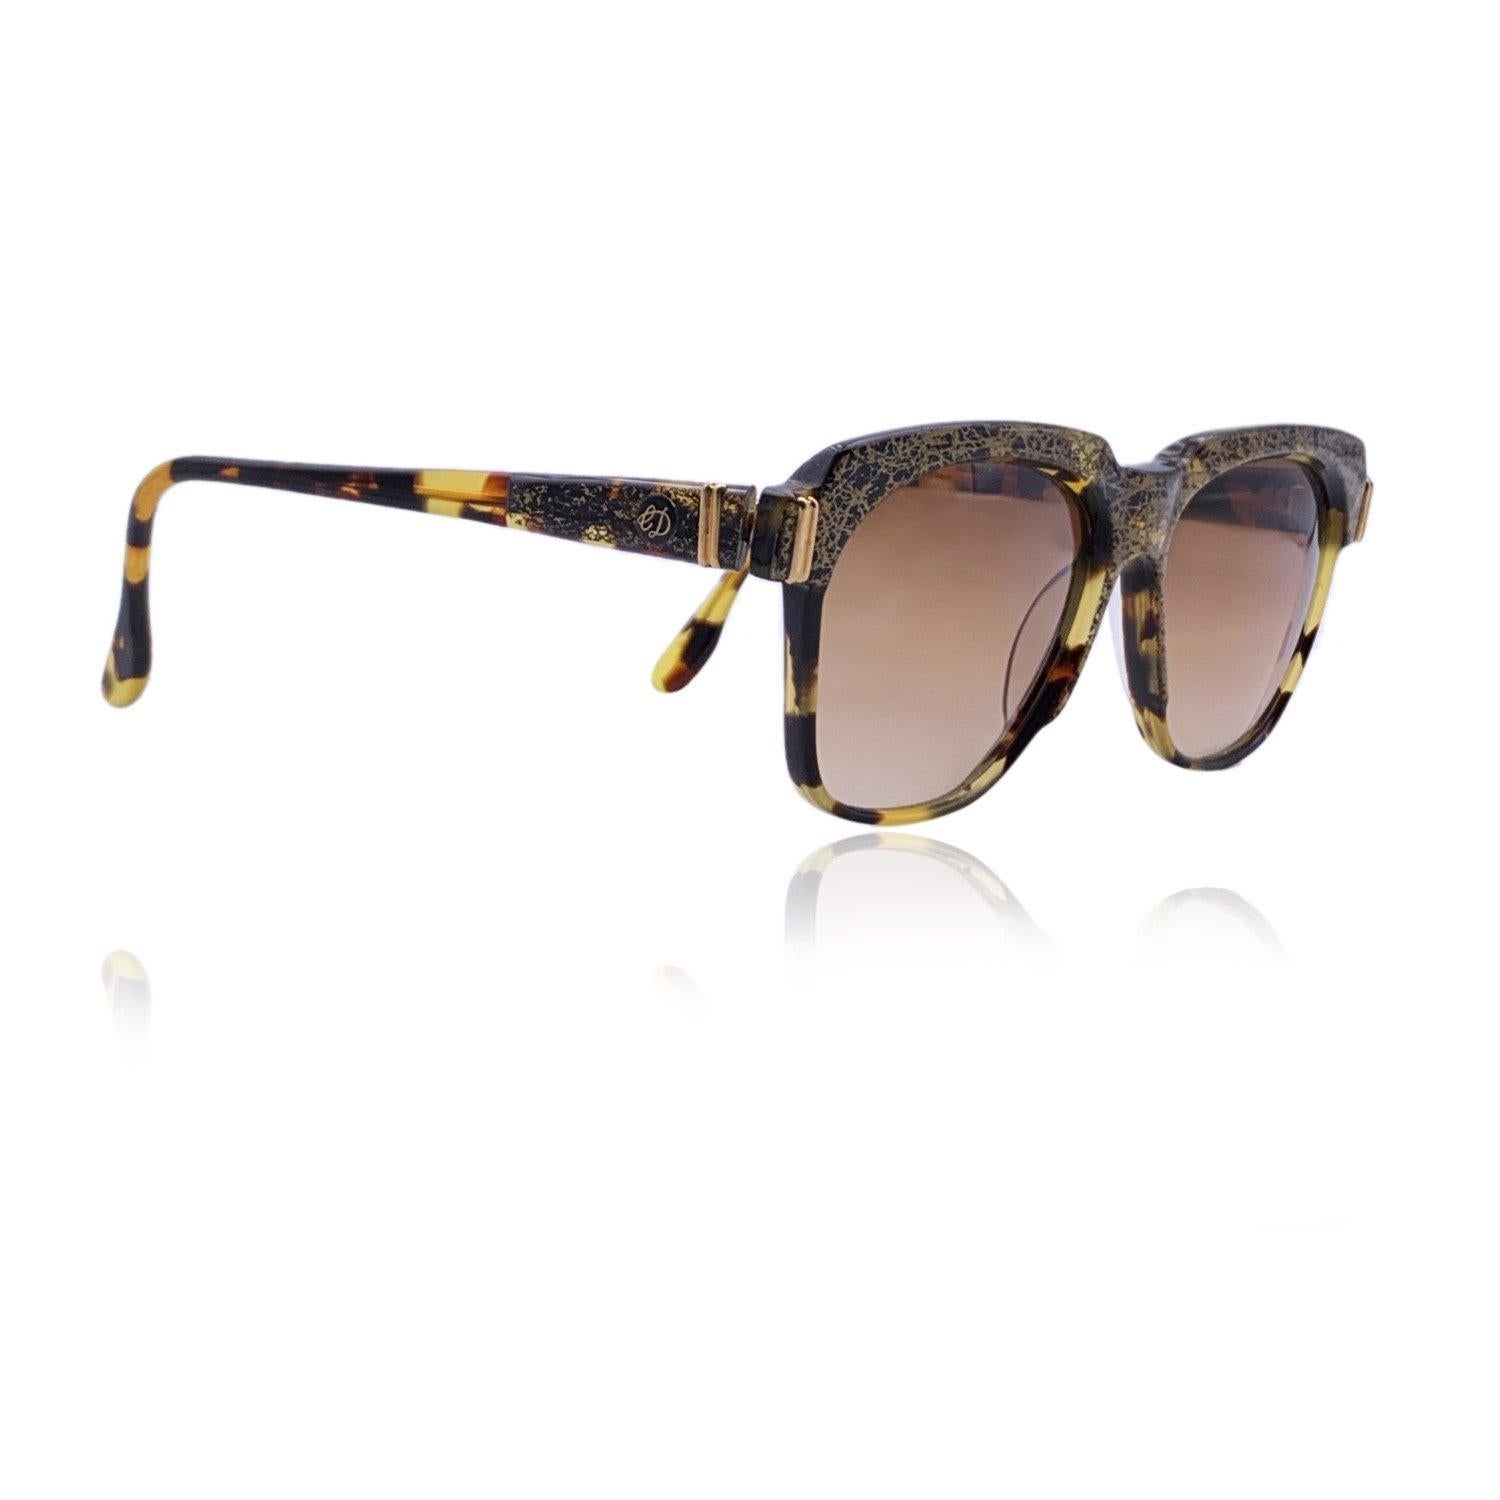 Christopher Dunhill by Fova Vintage sunglasses Mod. 2398, from the 90s. Black and golden acetate frame. rope on the top part of the frame. Original gradient lenses in brown color. 100% Total UVA/UVB protection. Made in FItaly Details MATERIAL: